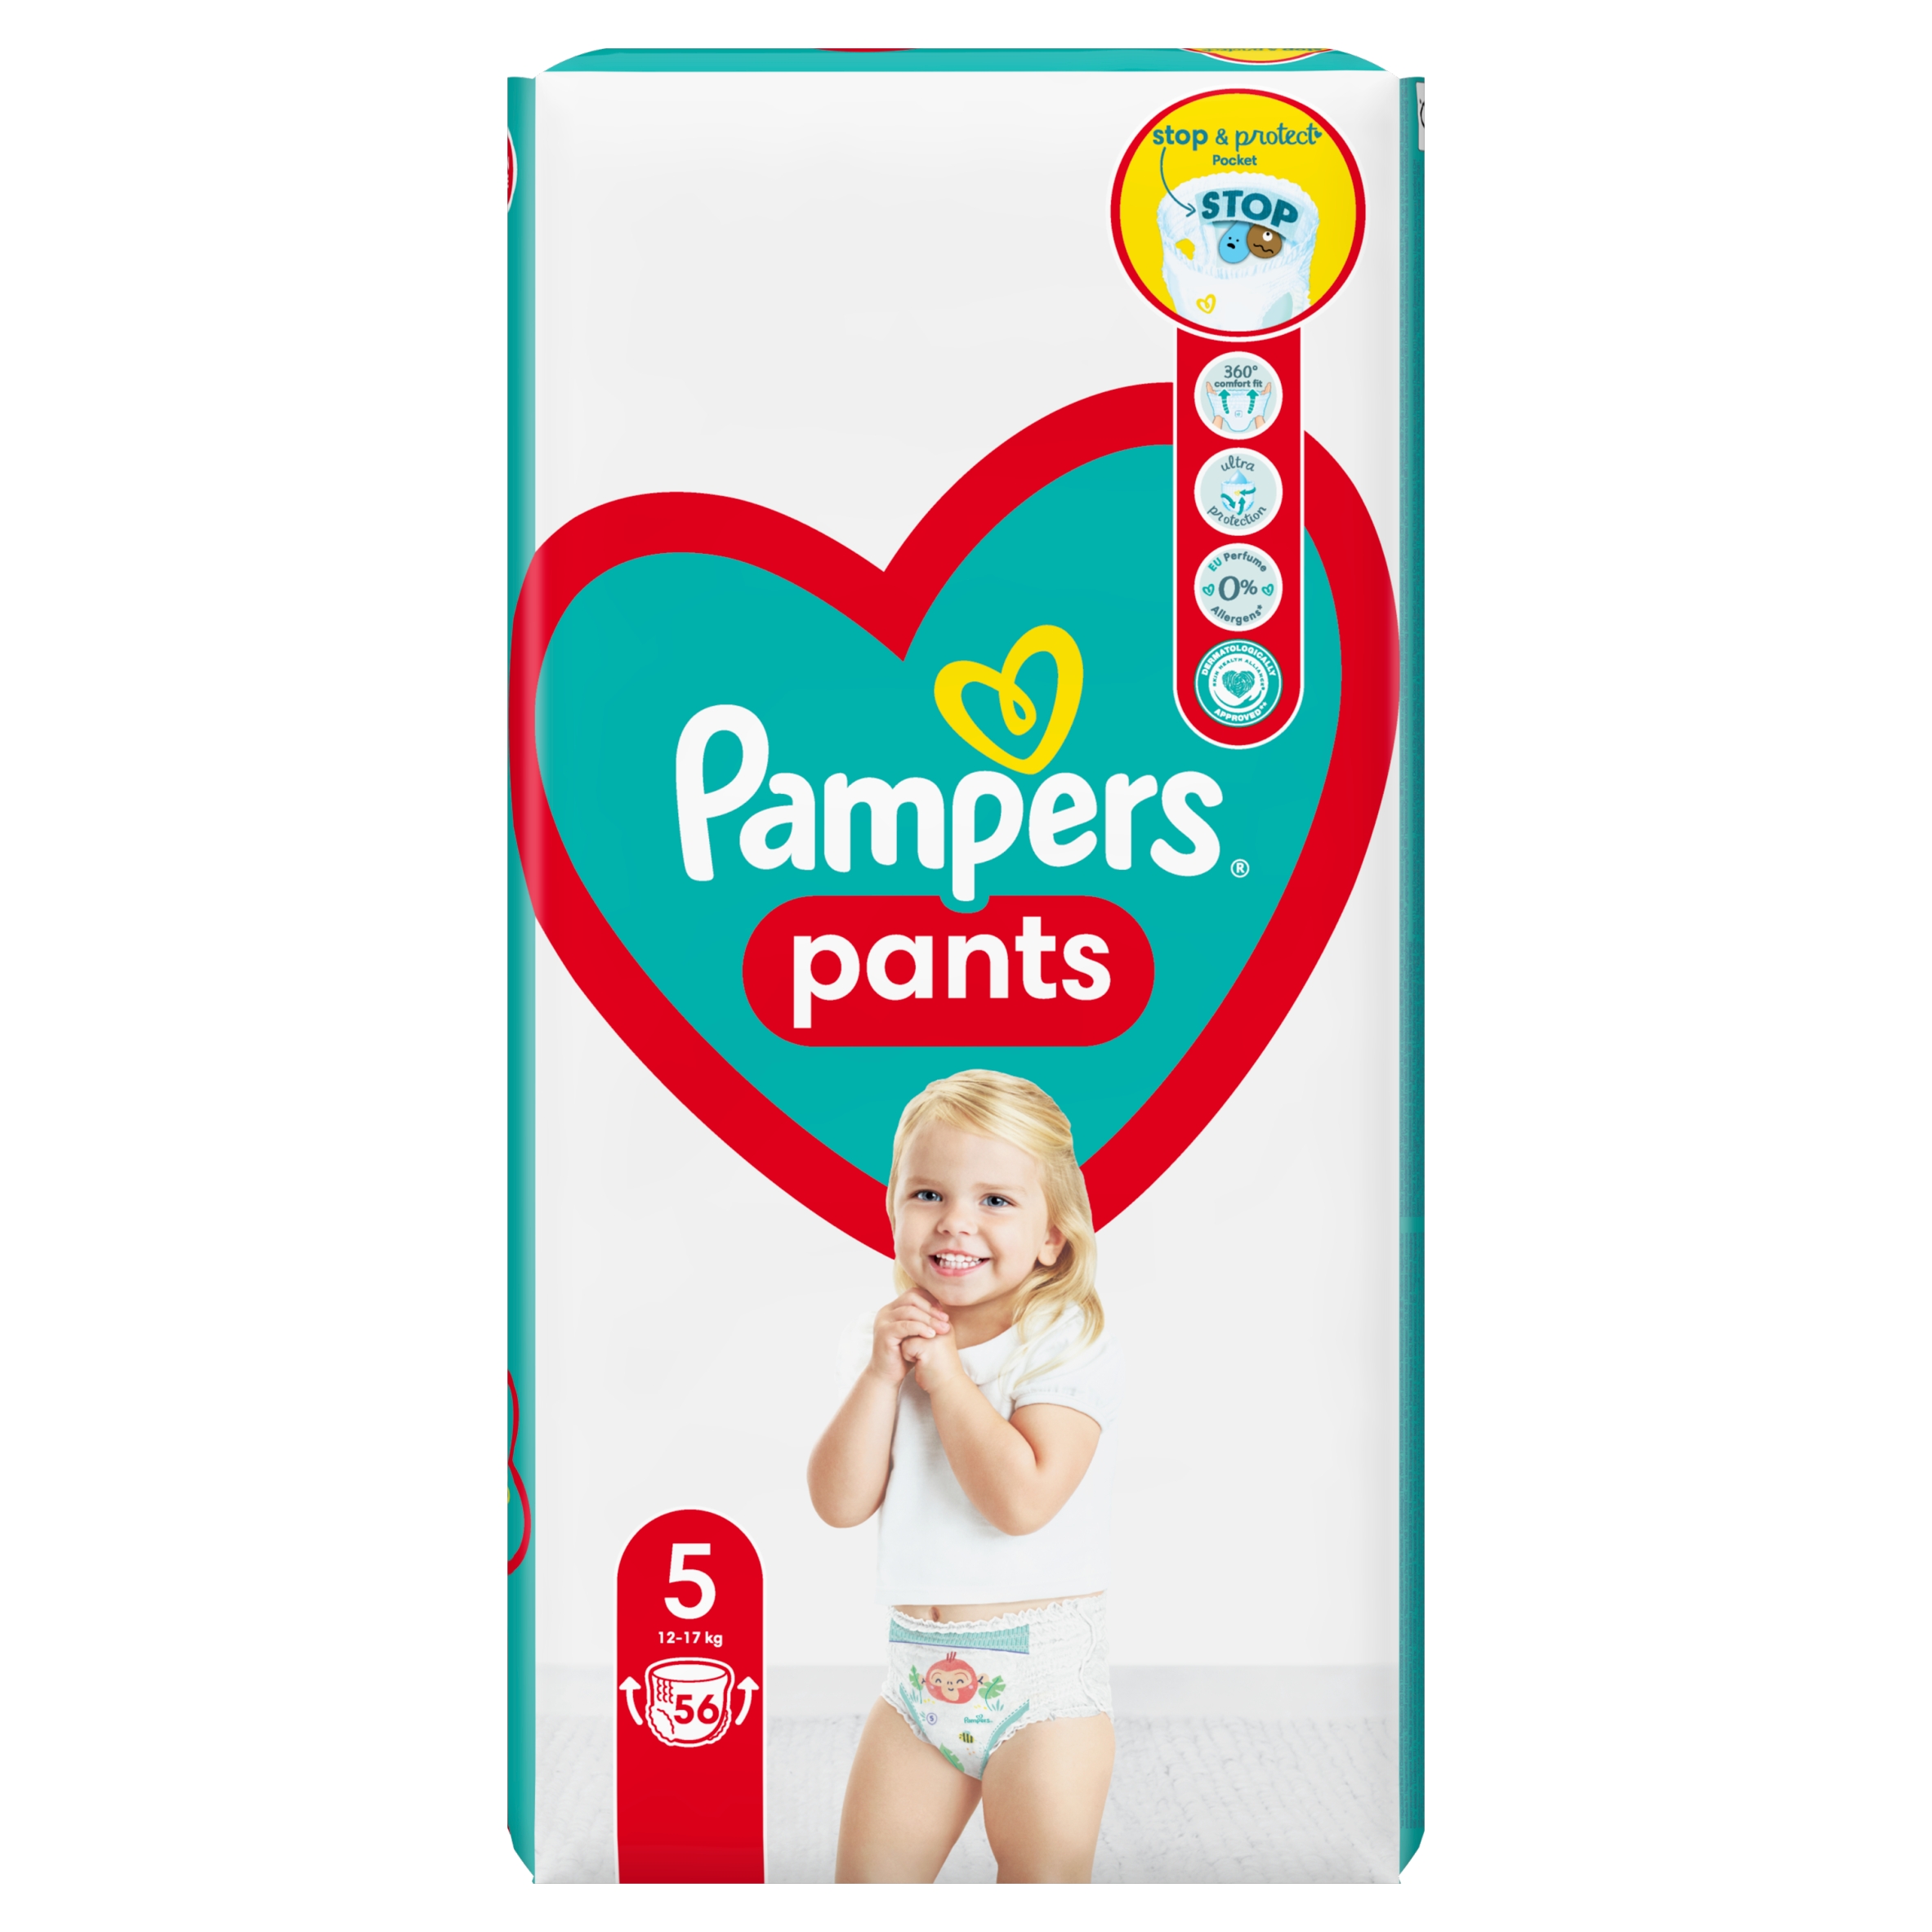 czym sie roznia pampers active baby a active baby dry